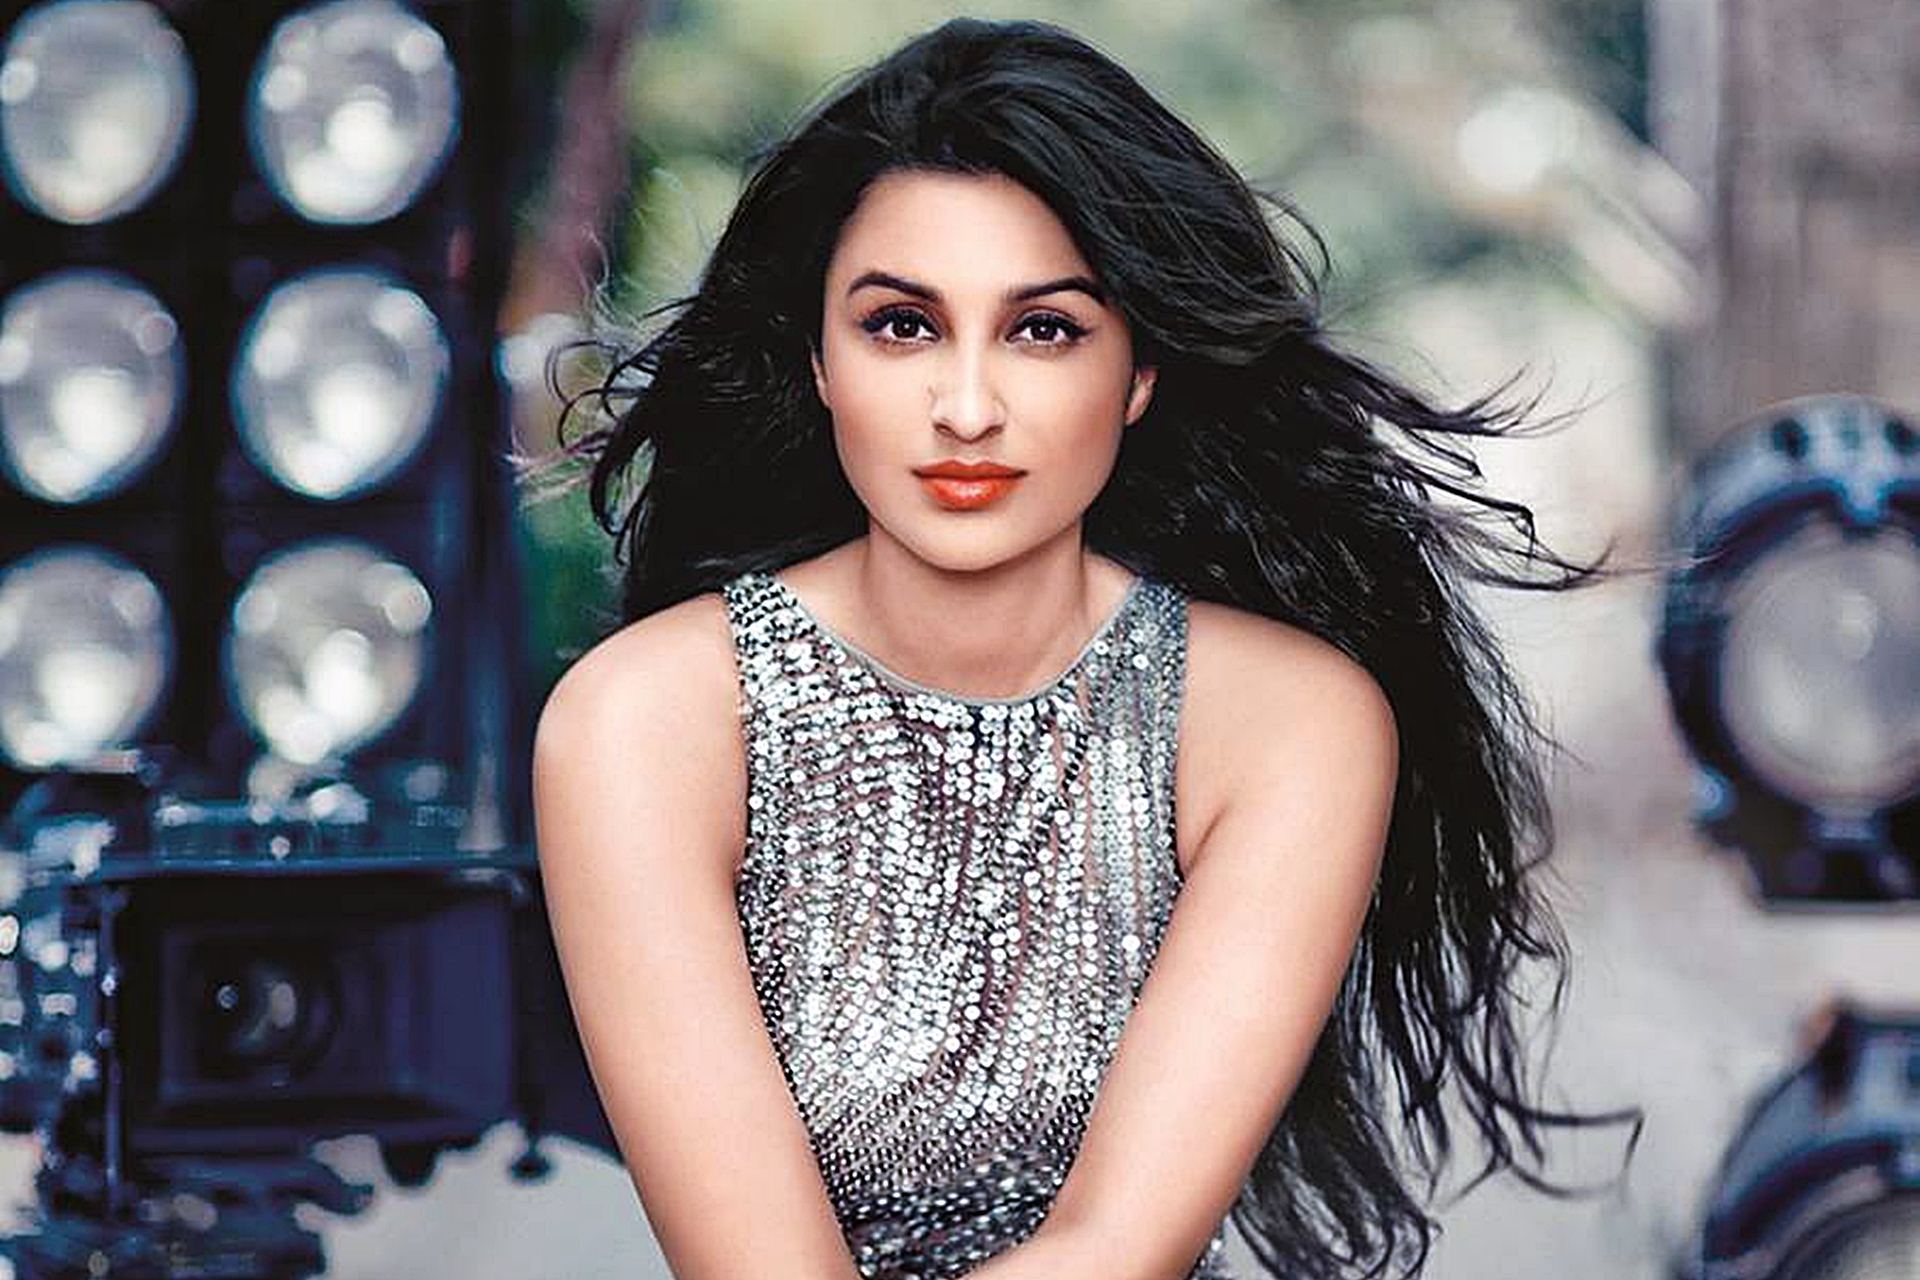 Parineeti Chopra - Top 10 Most Followed Bollywood Actresses on Instagram - Top 10 Indian Actresses who have the highest number of Instagram followers - Top 10 Bollywood Actresses with millions of Instagram Followers - Top 10 Indian Actresses with millions of Instagram Followers - Most Famous Bollywood Actresses on Instagram